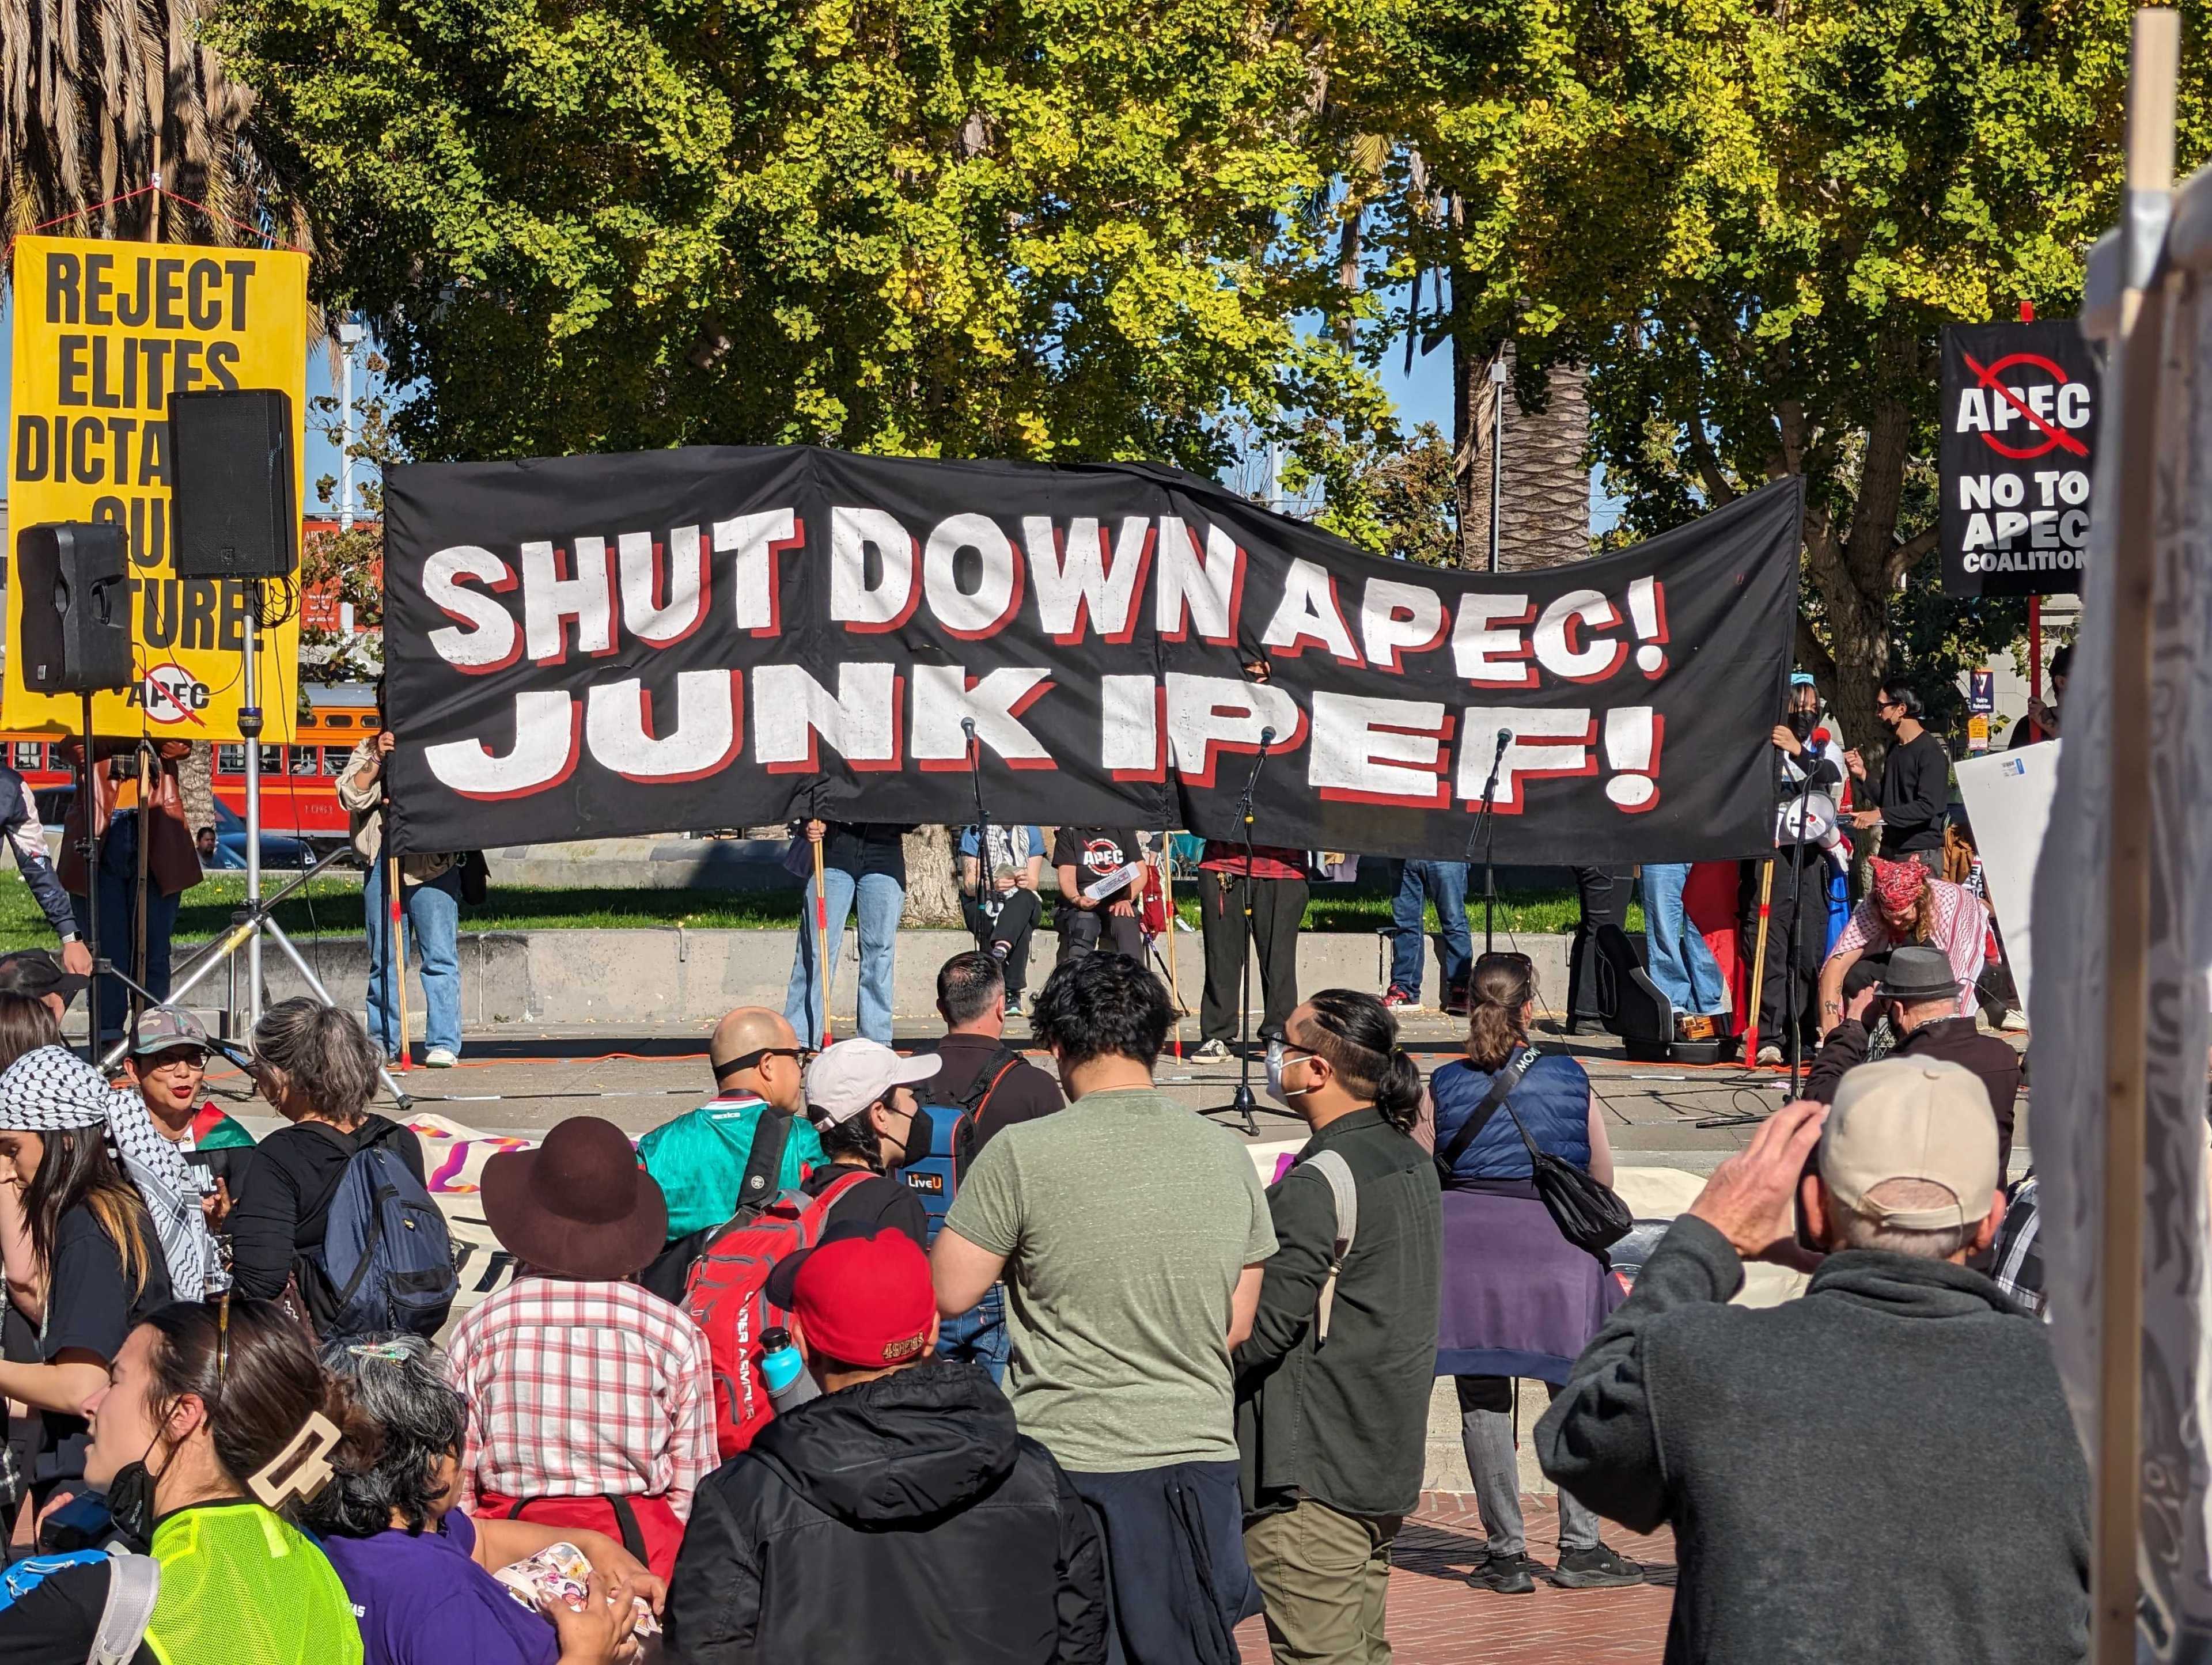 A black banner that says Shut Down APEC! Junk IPEF! is displayed in a public plaza